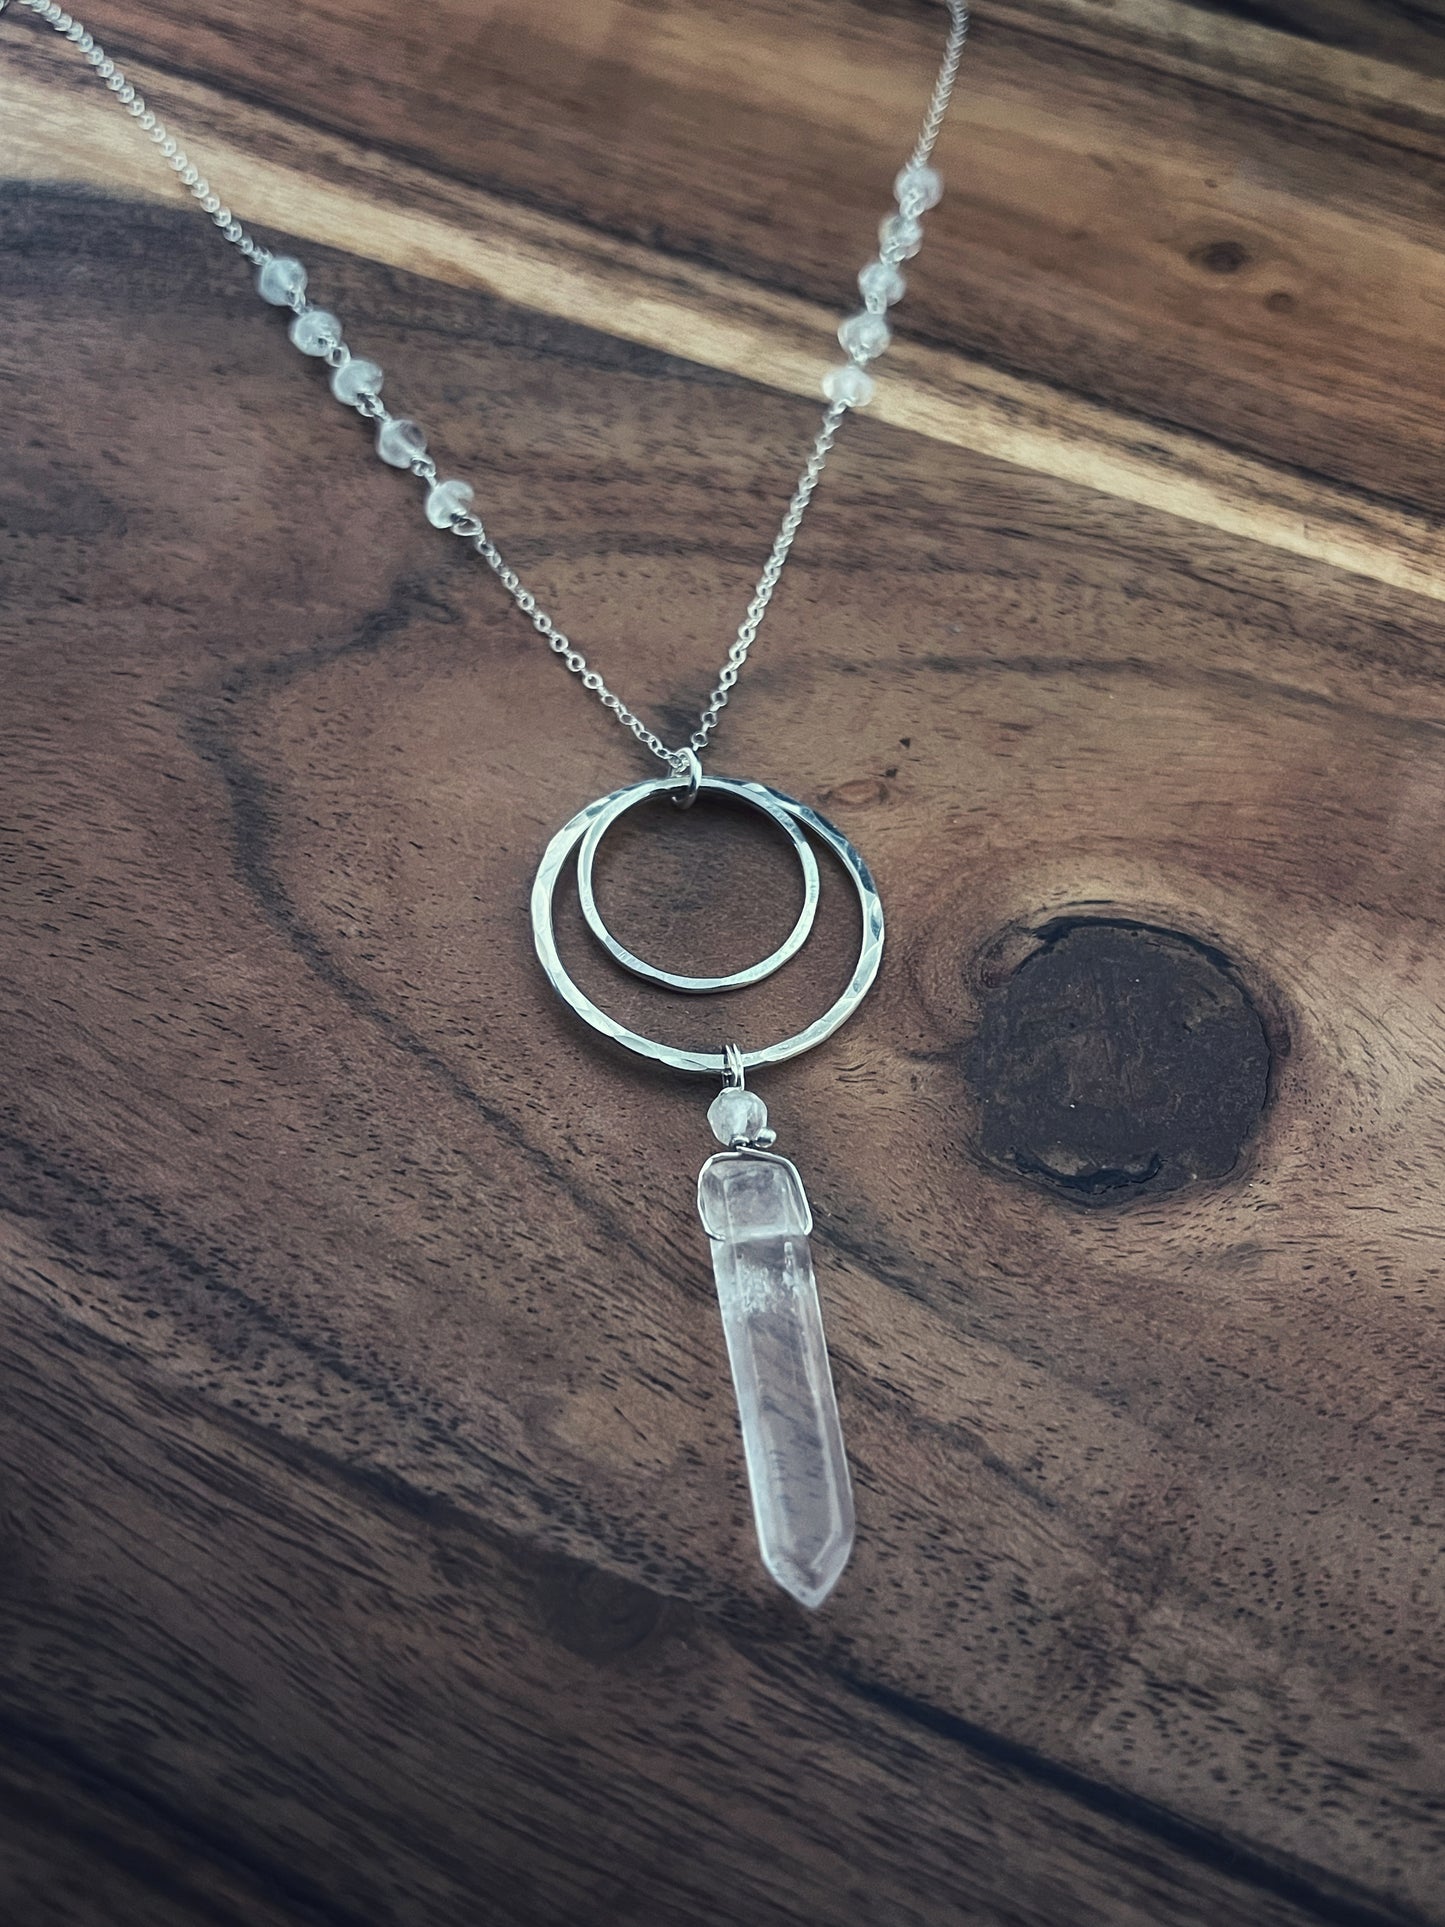 Forged sterling double disk necklace with quartz